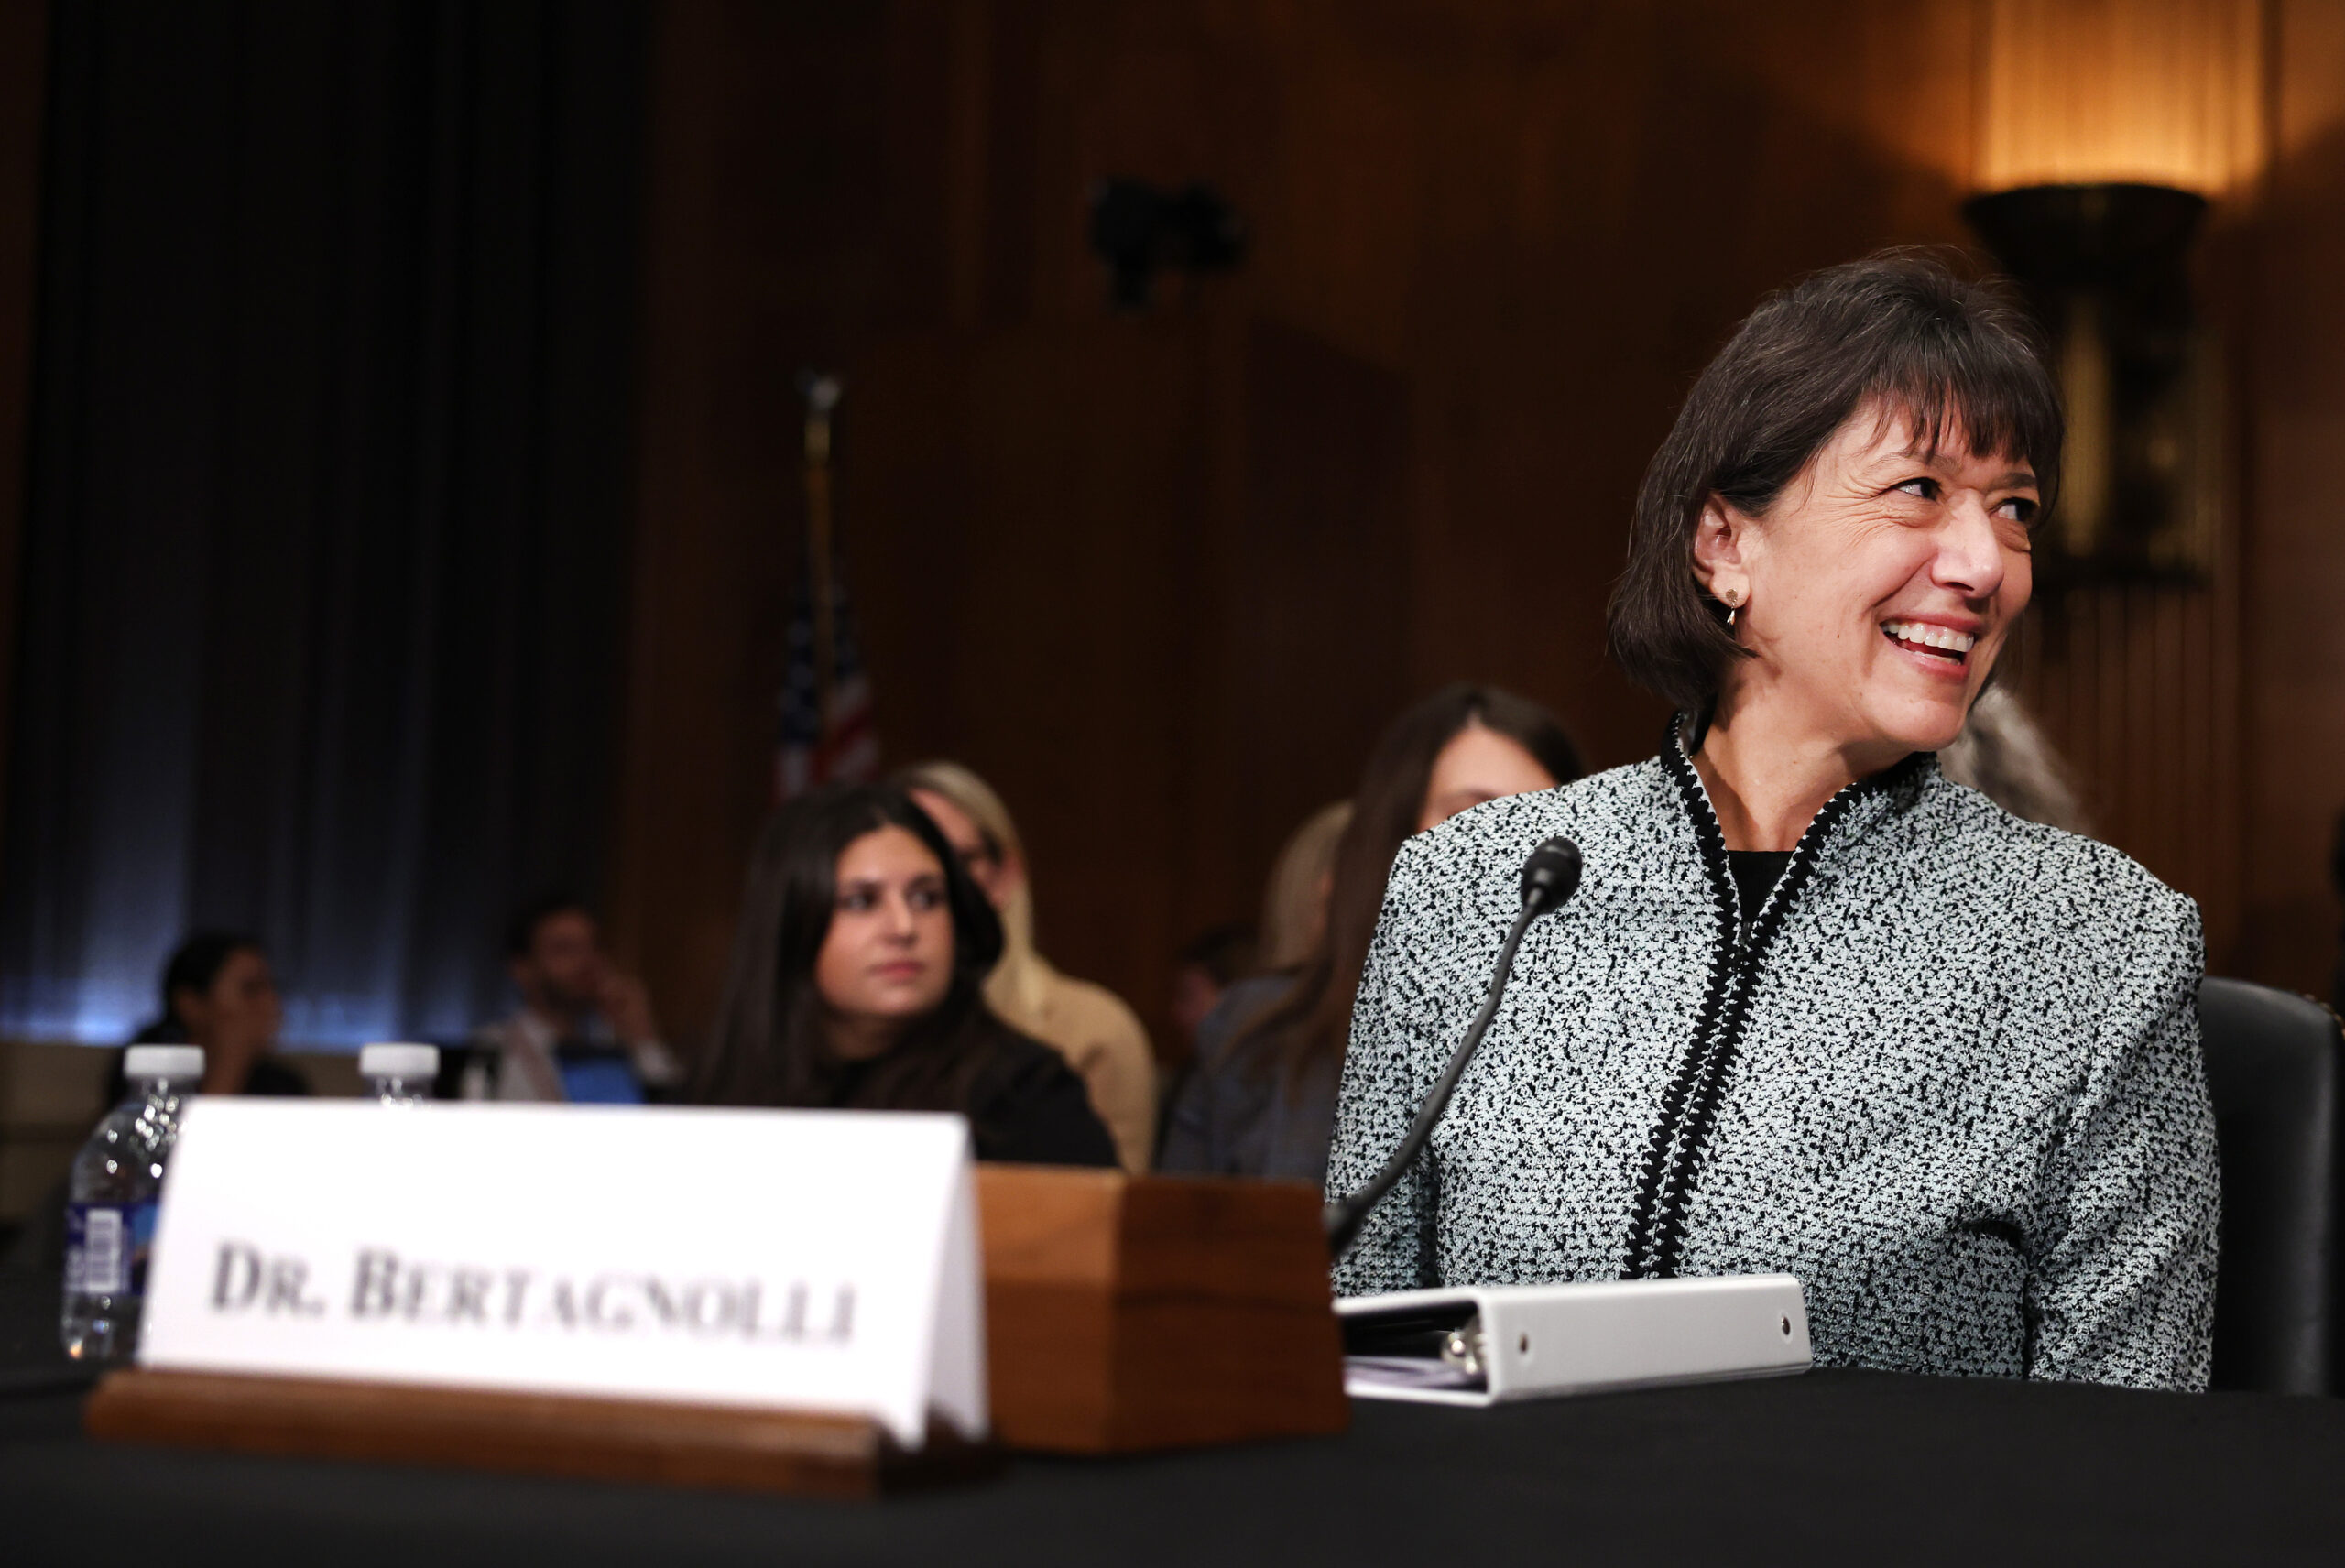 The confirmation of Monica Bertagnolli as the director of the National Institutes of Health has been approved by the Senate.